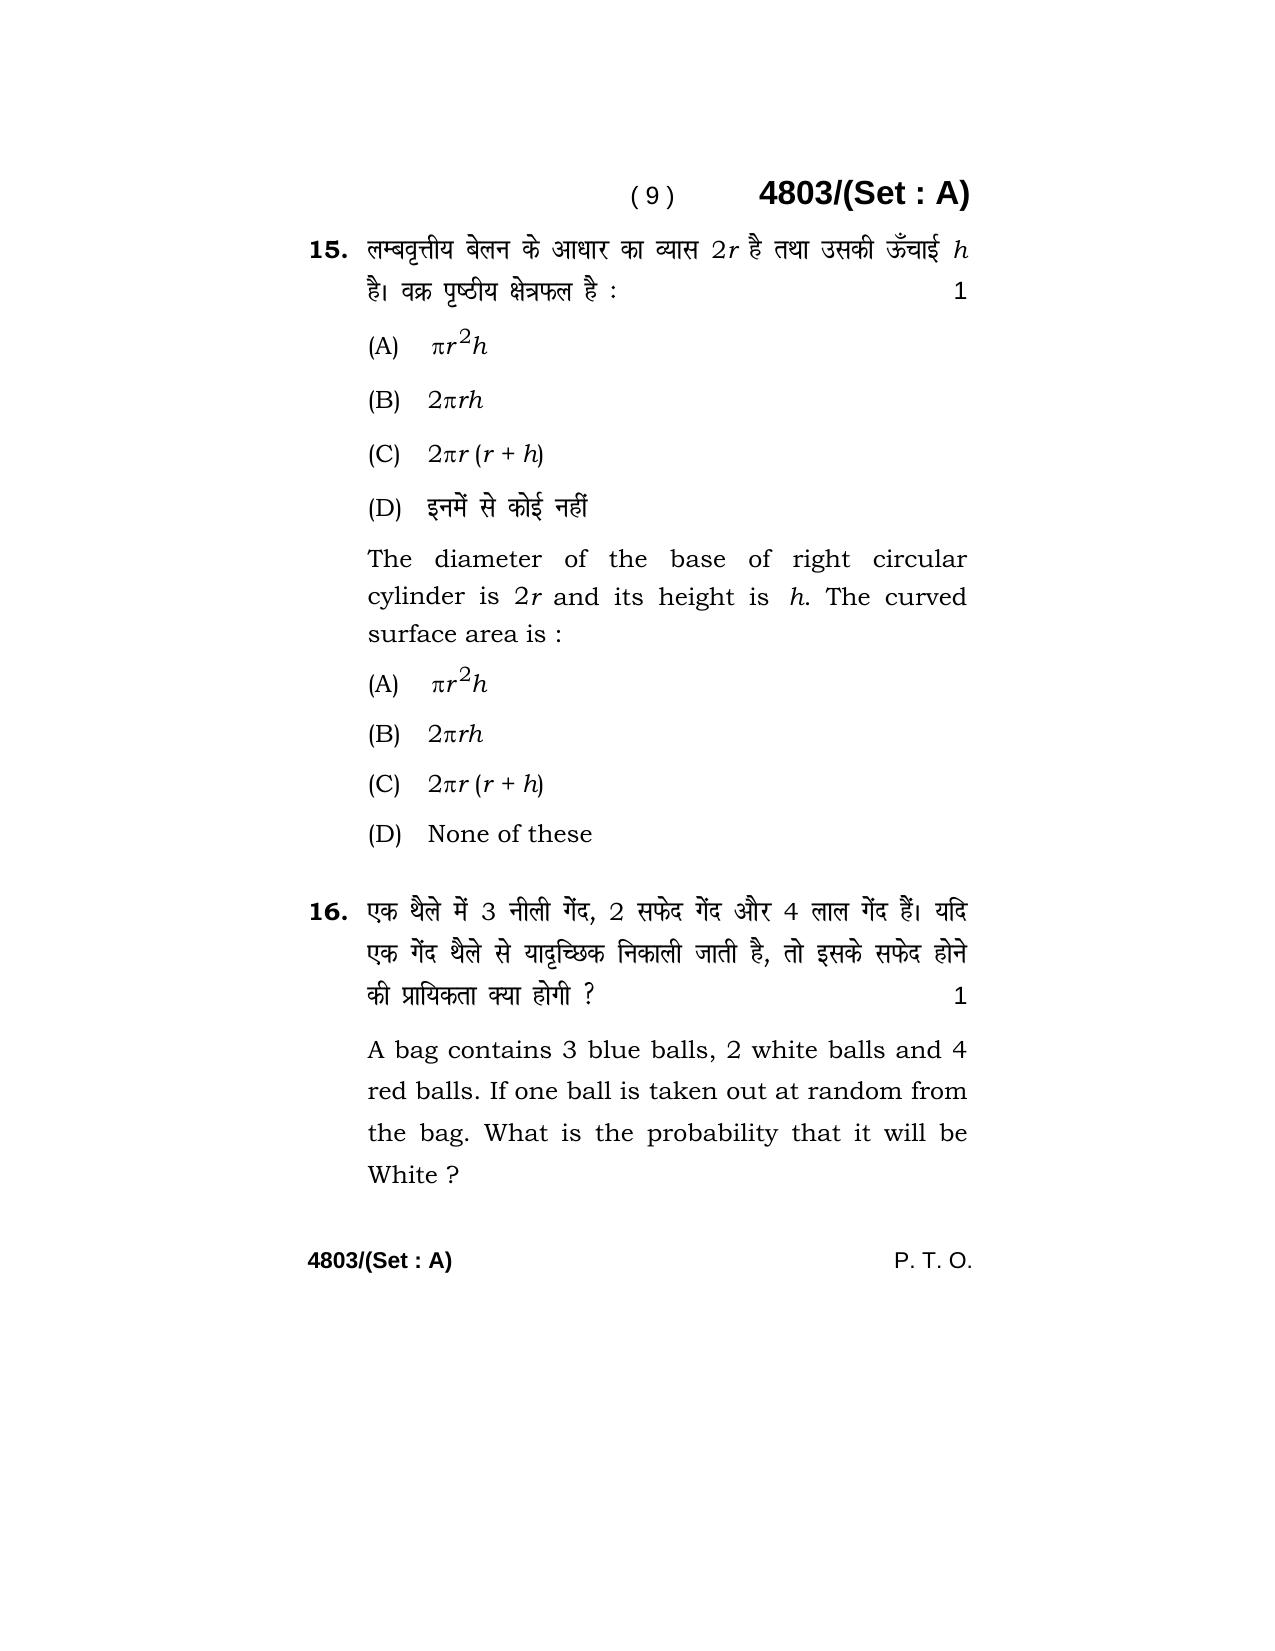 Haryana Board HBSE Class 10 Mathematics 2020 Question Paper - Page 9